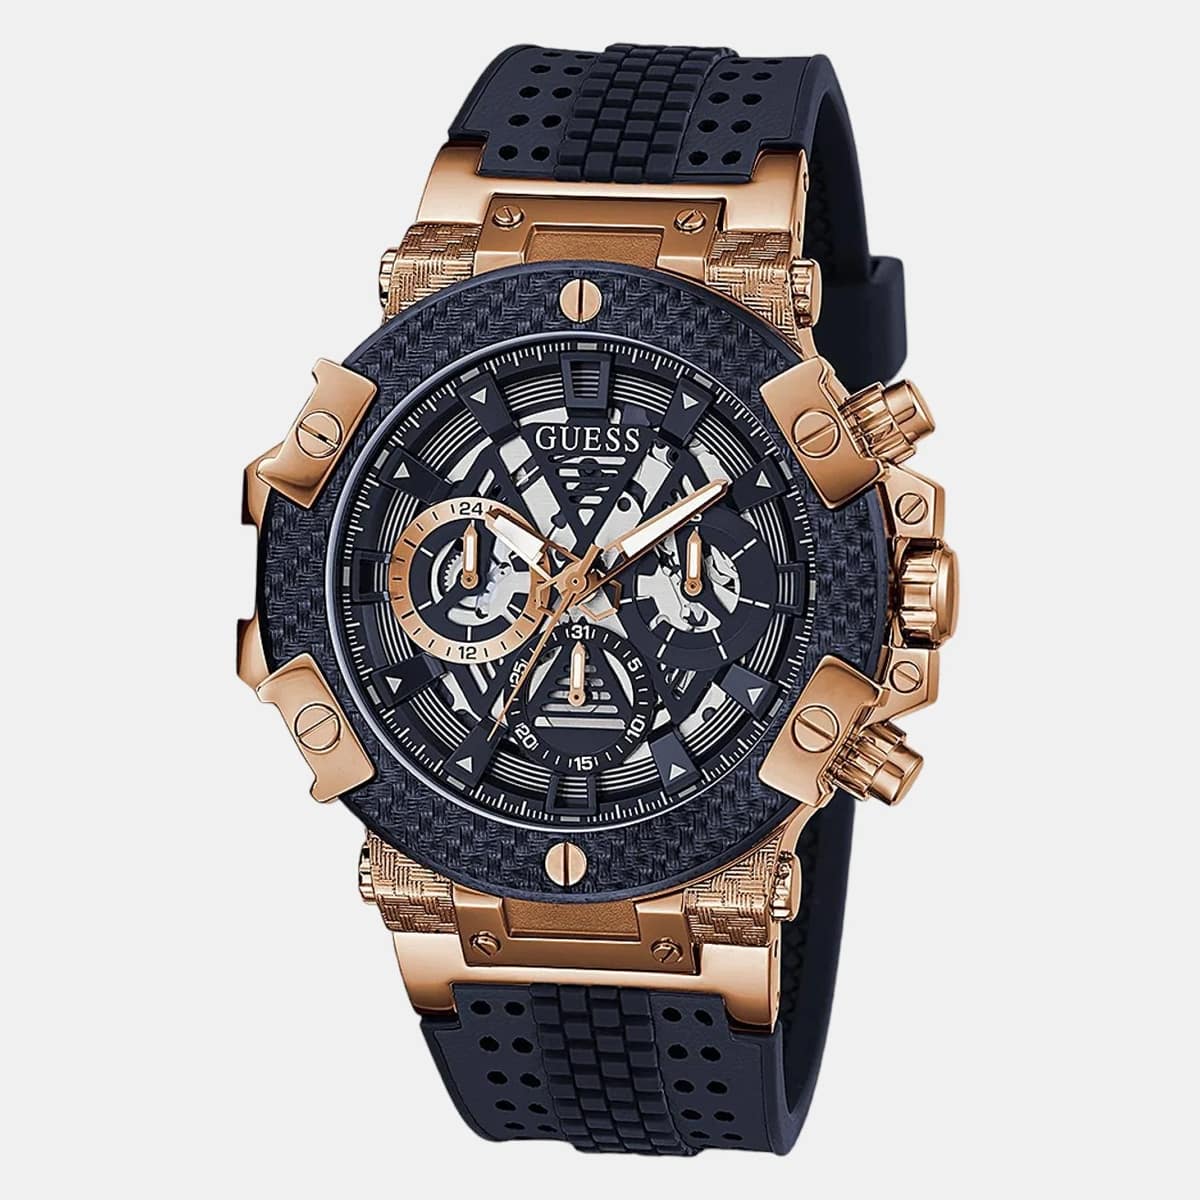 MONTRE GUESS CARBON HOMME CHRONO SILICONE